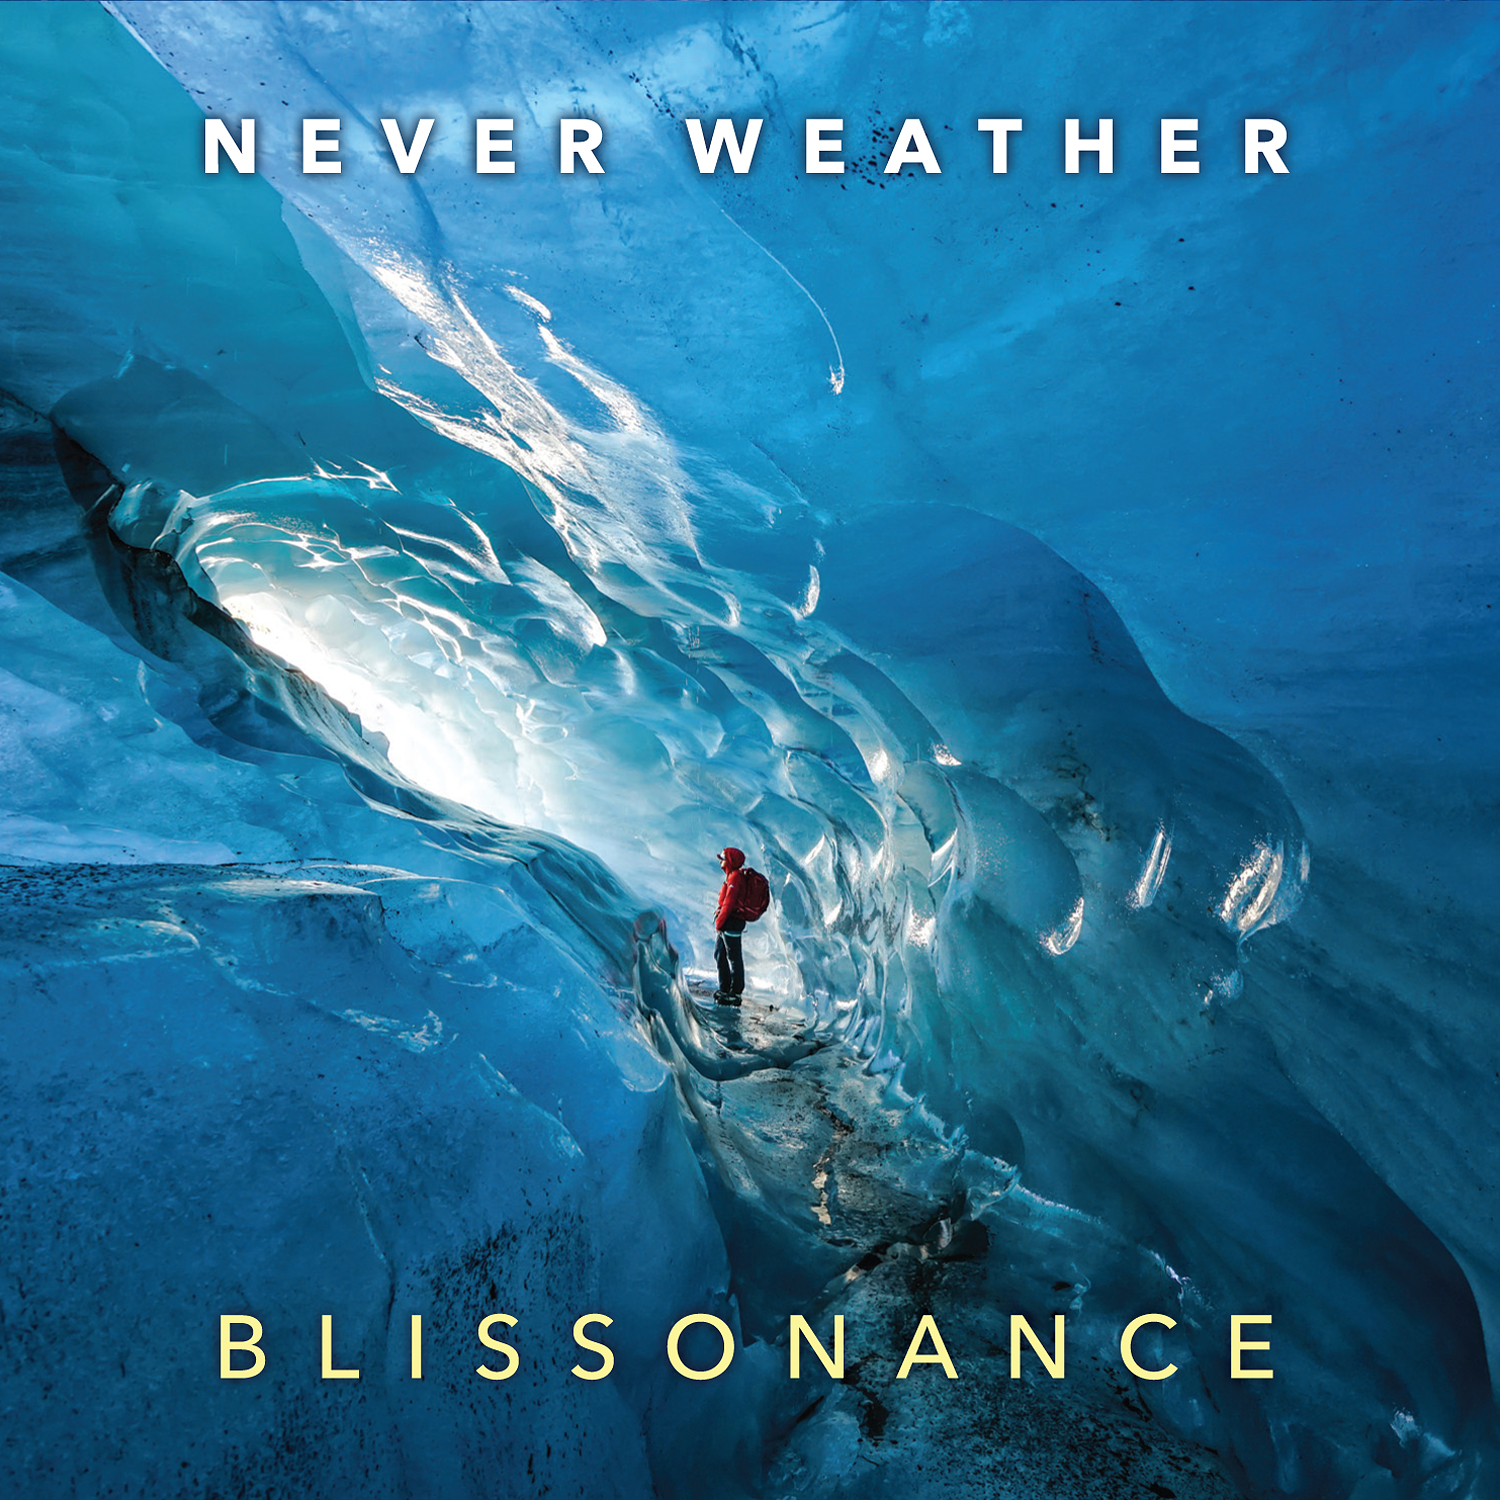 Art for Blissonance by Never Weather